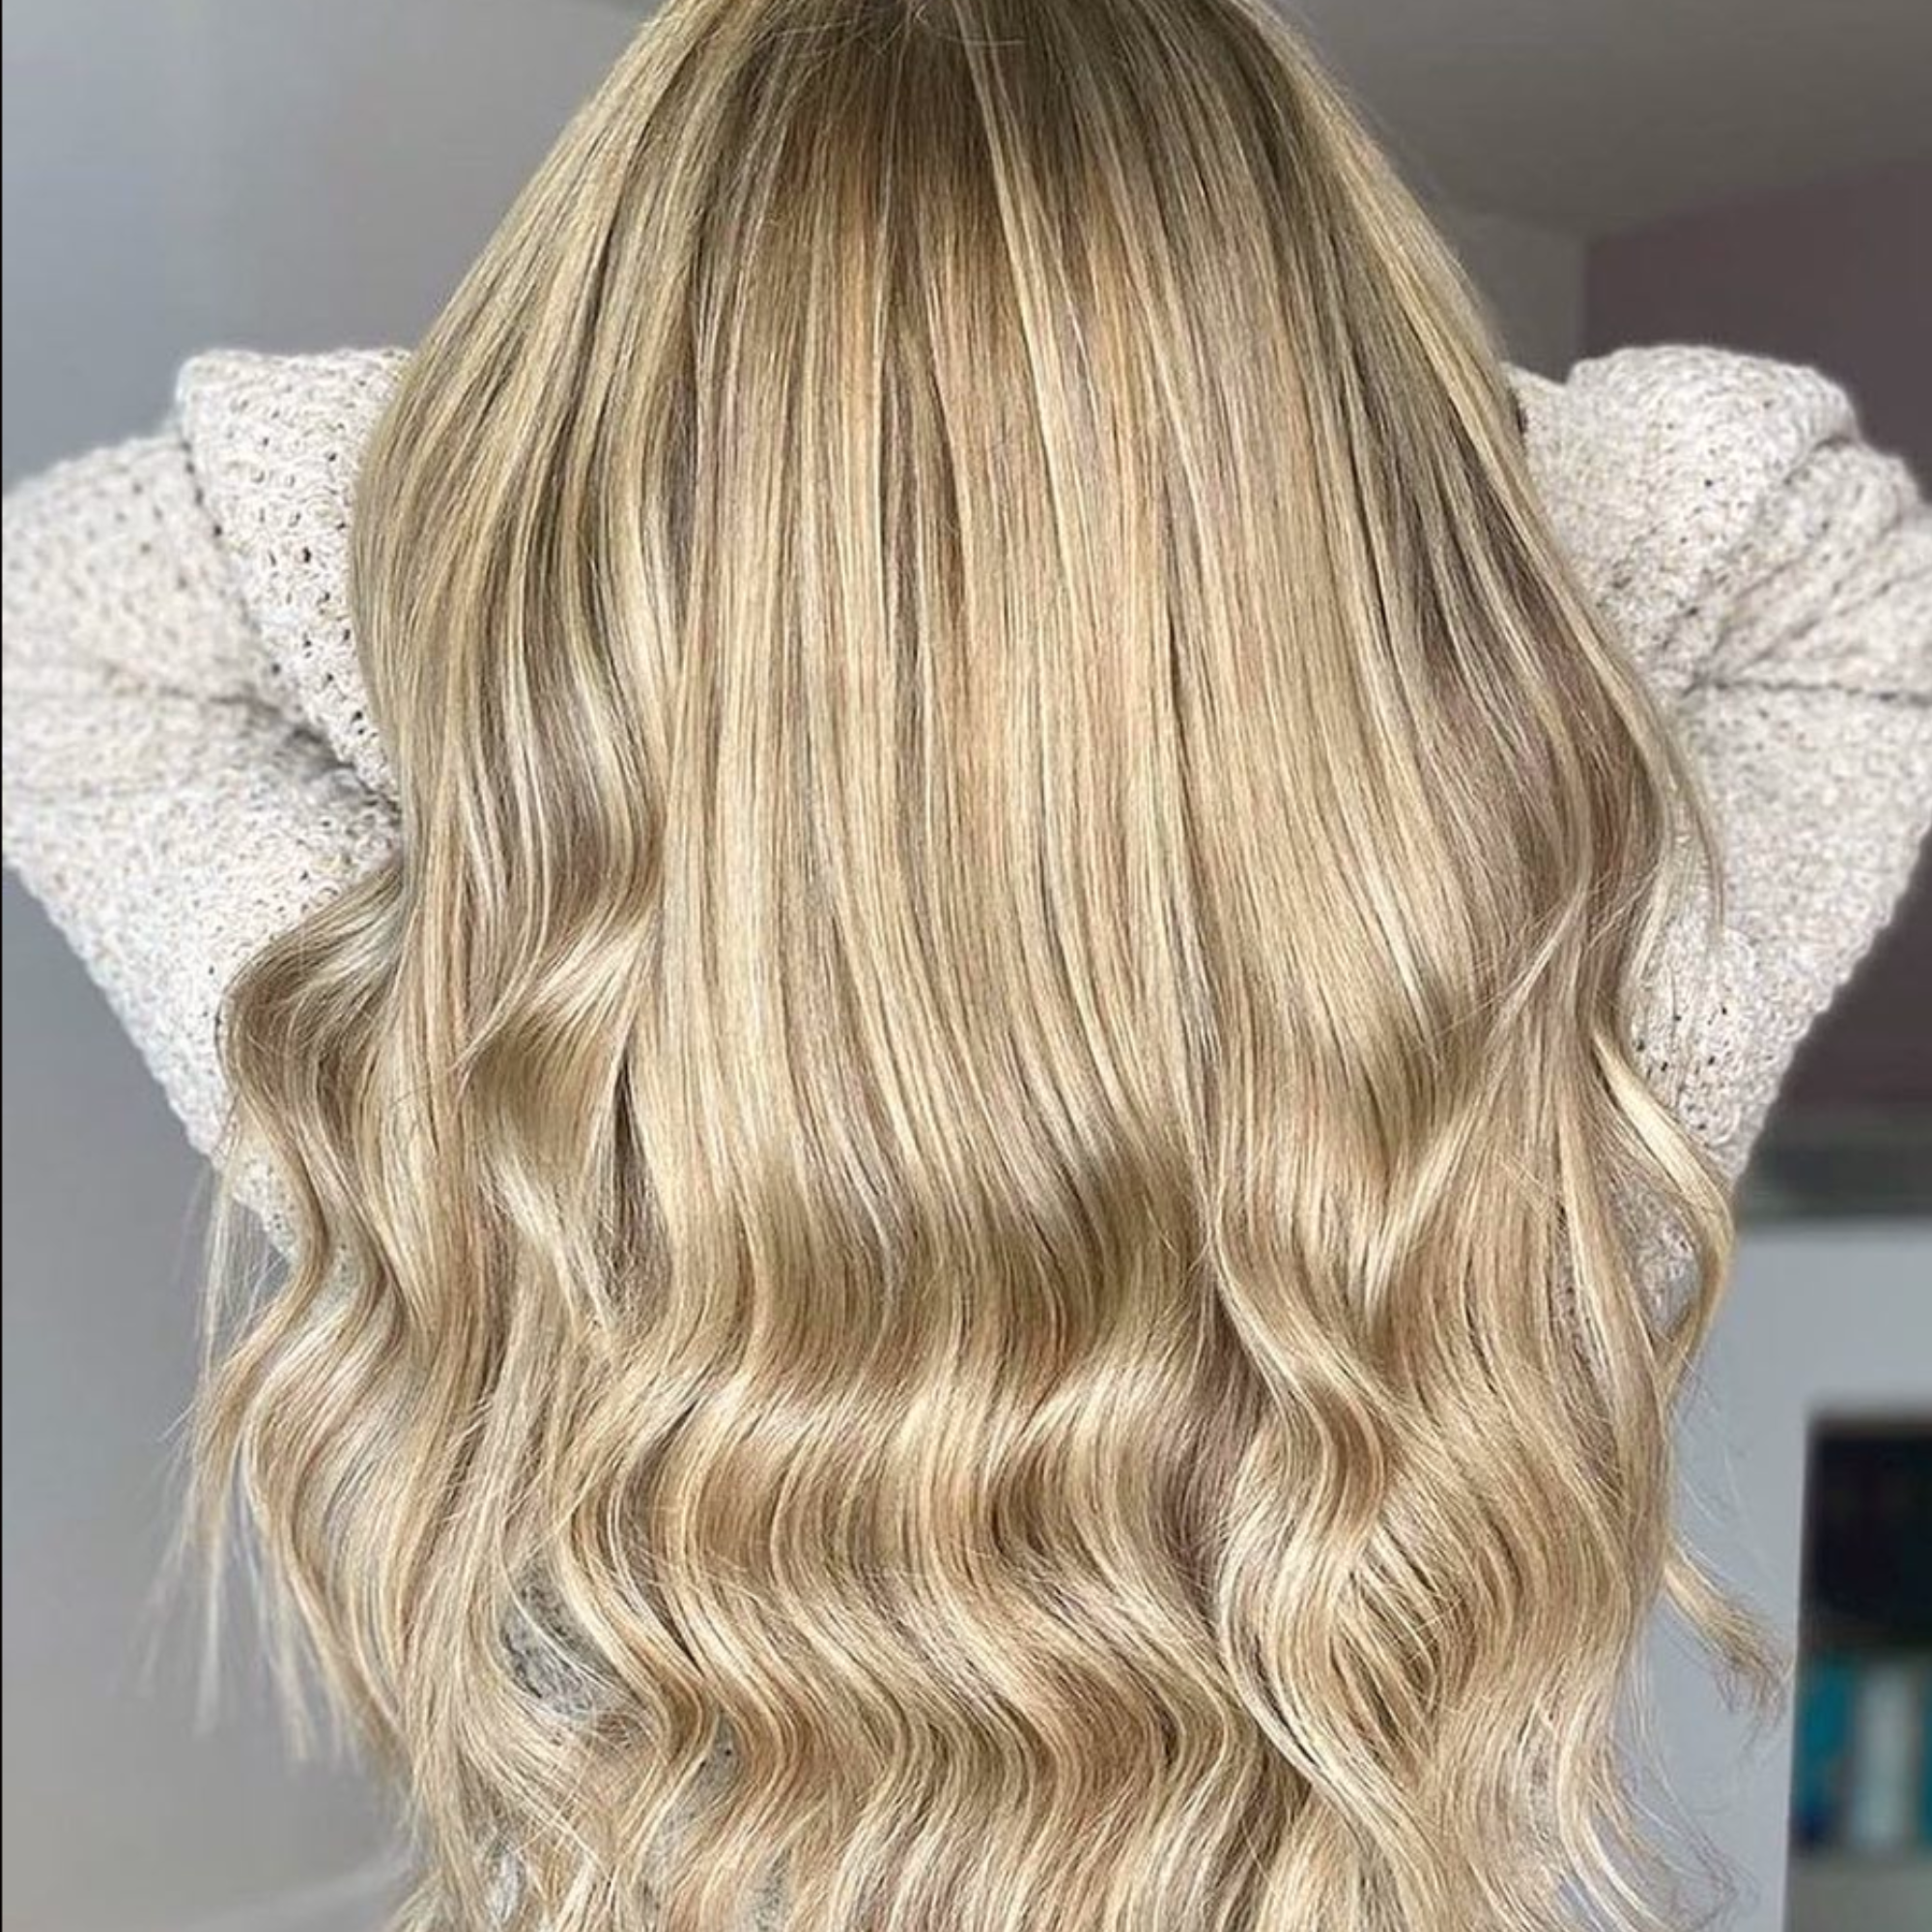 "customer wearing hair rehab london 24 inch ultimate clip-in hair extensions in blonde shade"